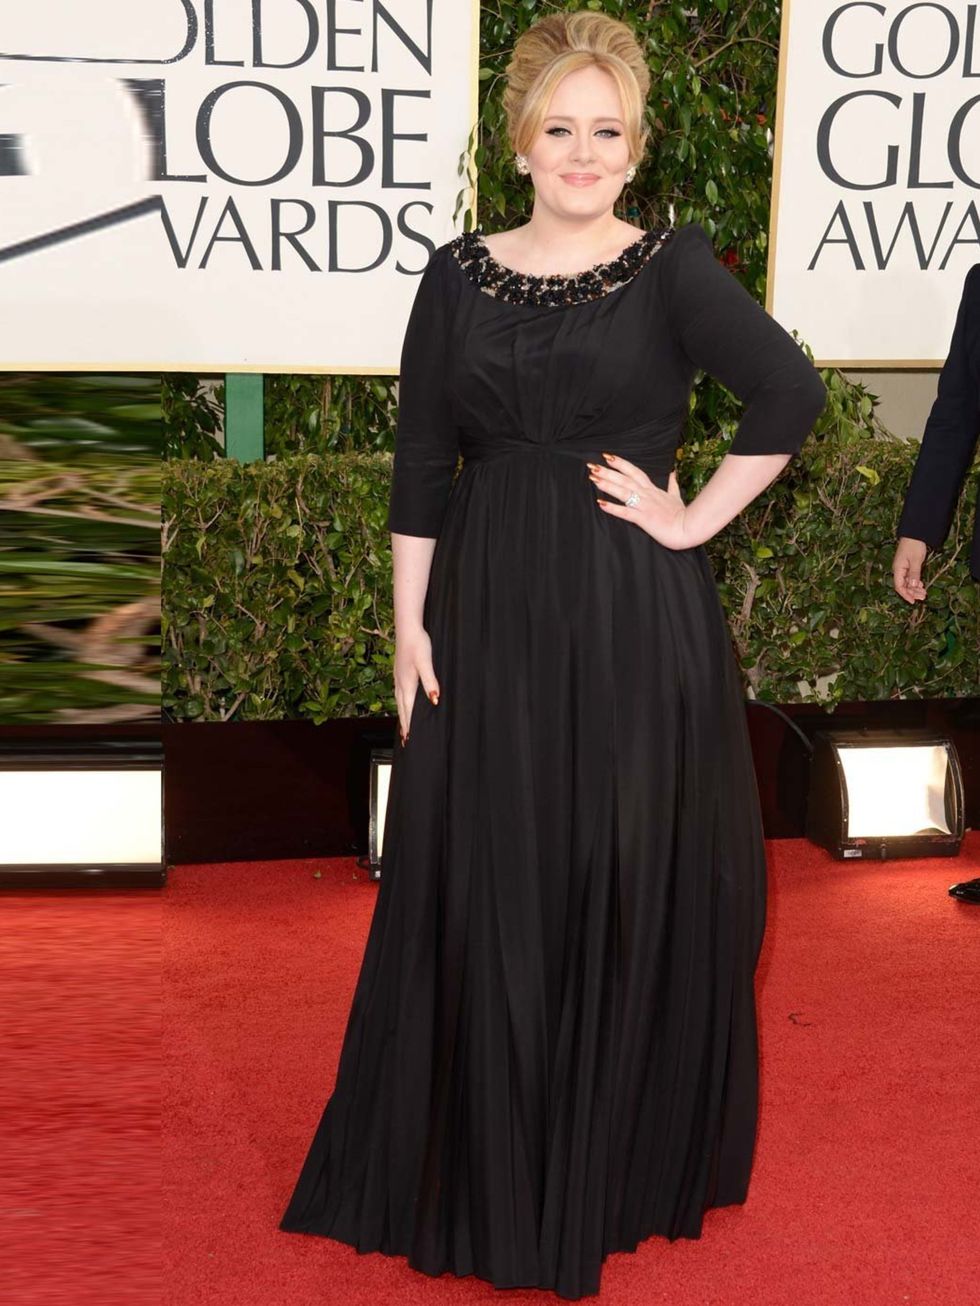 <p>Adele wore a black <a href="http://www.elleuk.com/catwalk/designer-a-z/burberry-prorsum/autumn-winter-2013">Burberry</a> gown to the 70th Annual Golden Globe Awards in Beverly Hills where she won Best Original Song for Skyfall, January 2013.</p>